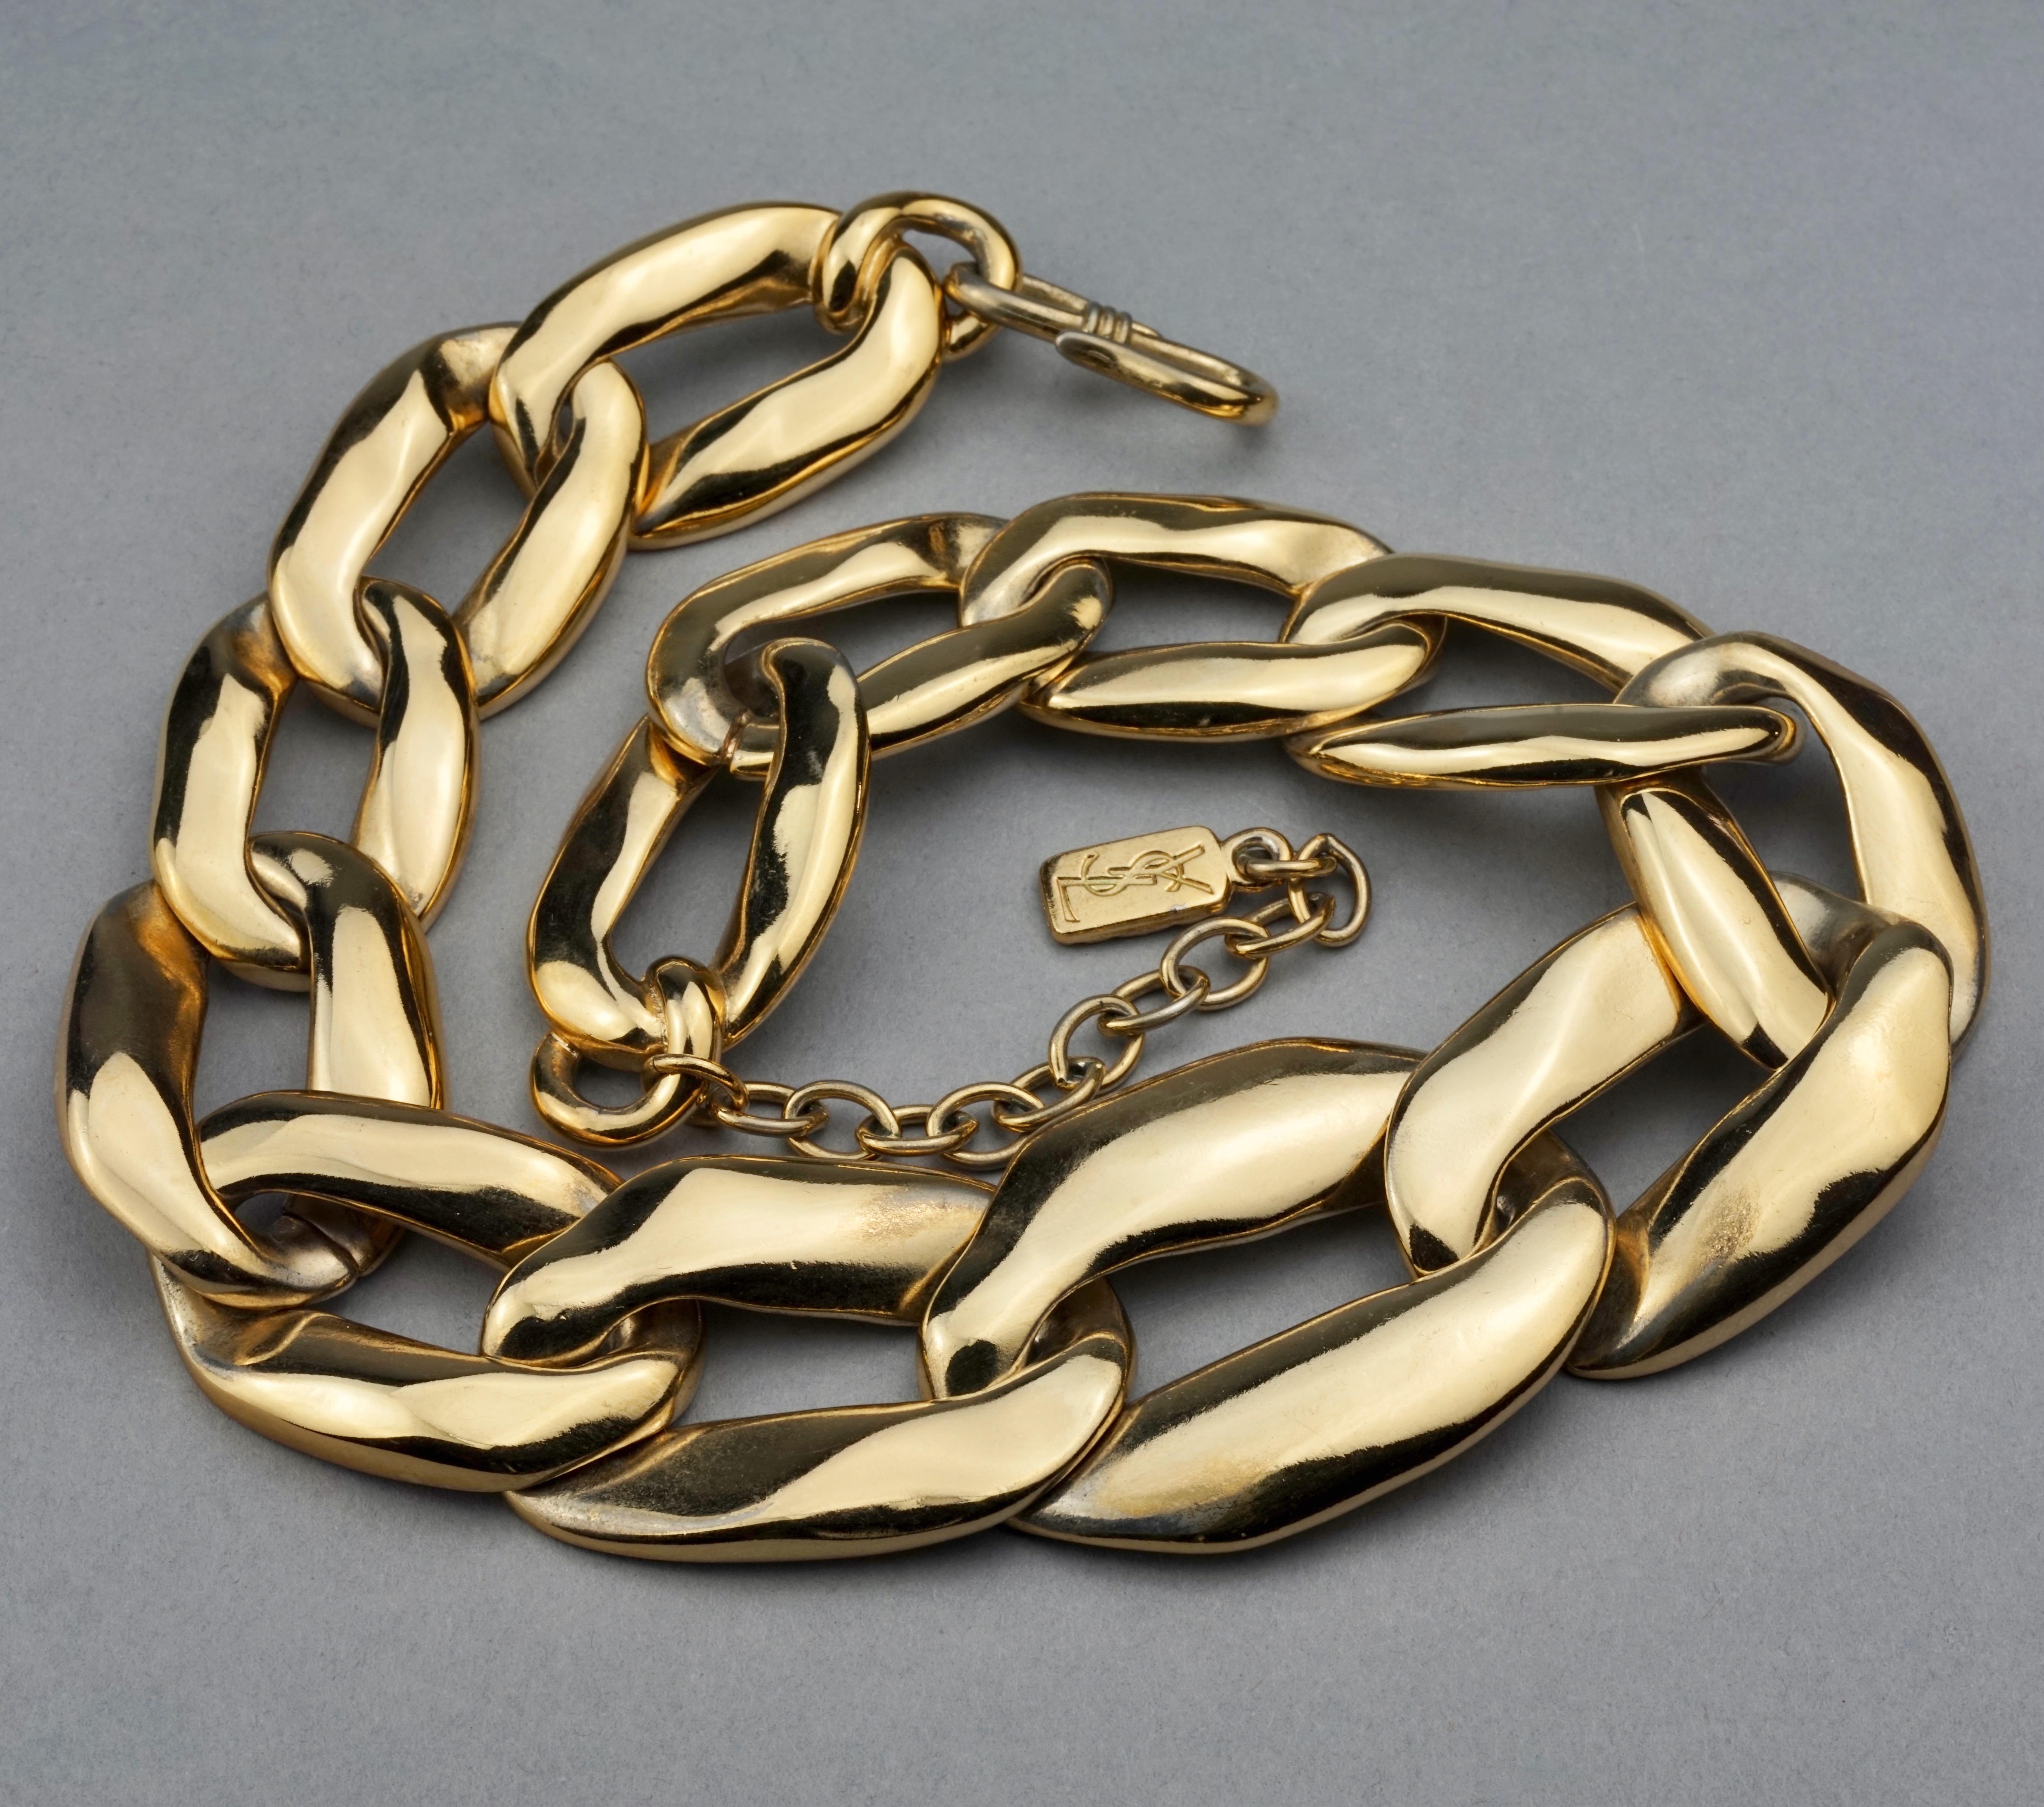 Vintage YVES SAINT LAURENT Ysl by Robert Goossens Chunky Chain Links Necklace 1